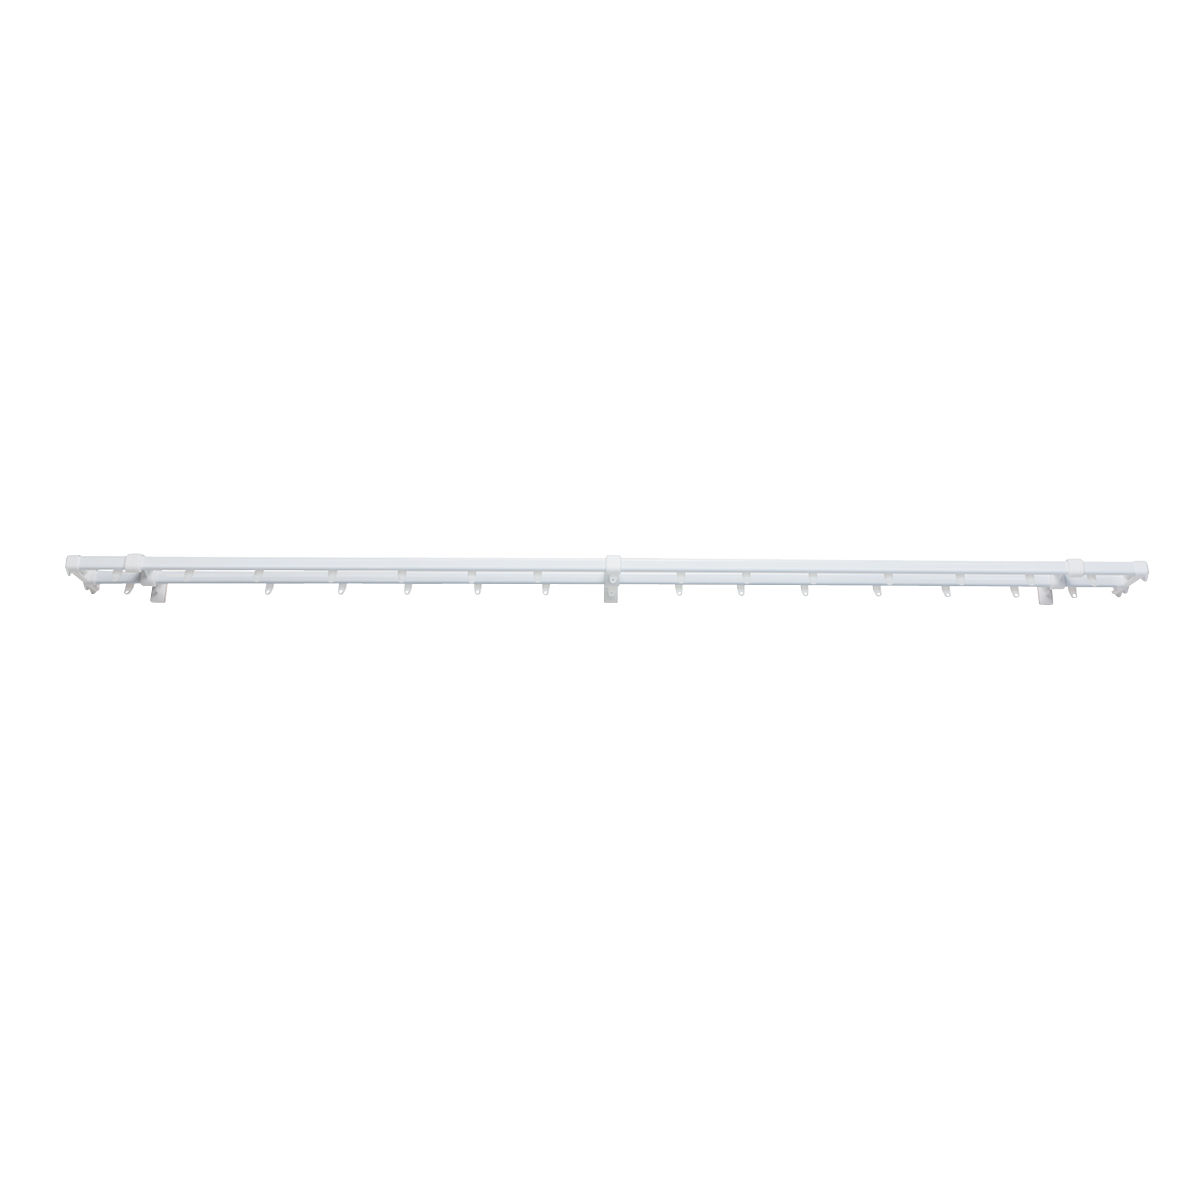 Curtain Track C-Steel Double White 2.0 m